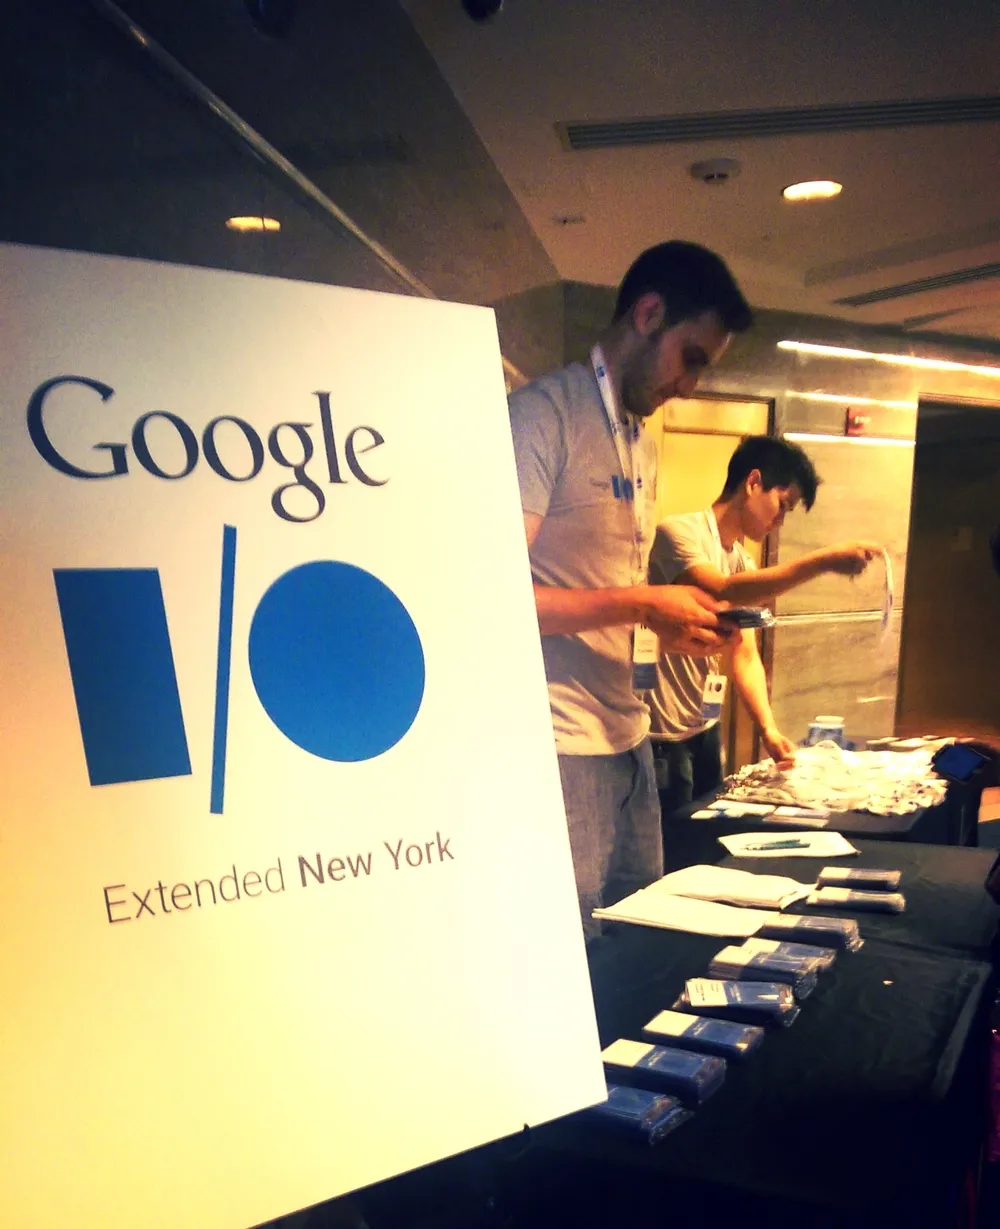 The Touchlab team and I attended the I/O Extended New York event at Google headquarters. We left with lasting impressions of Android’s next chapter...